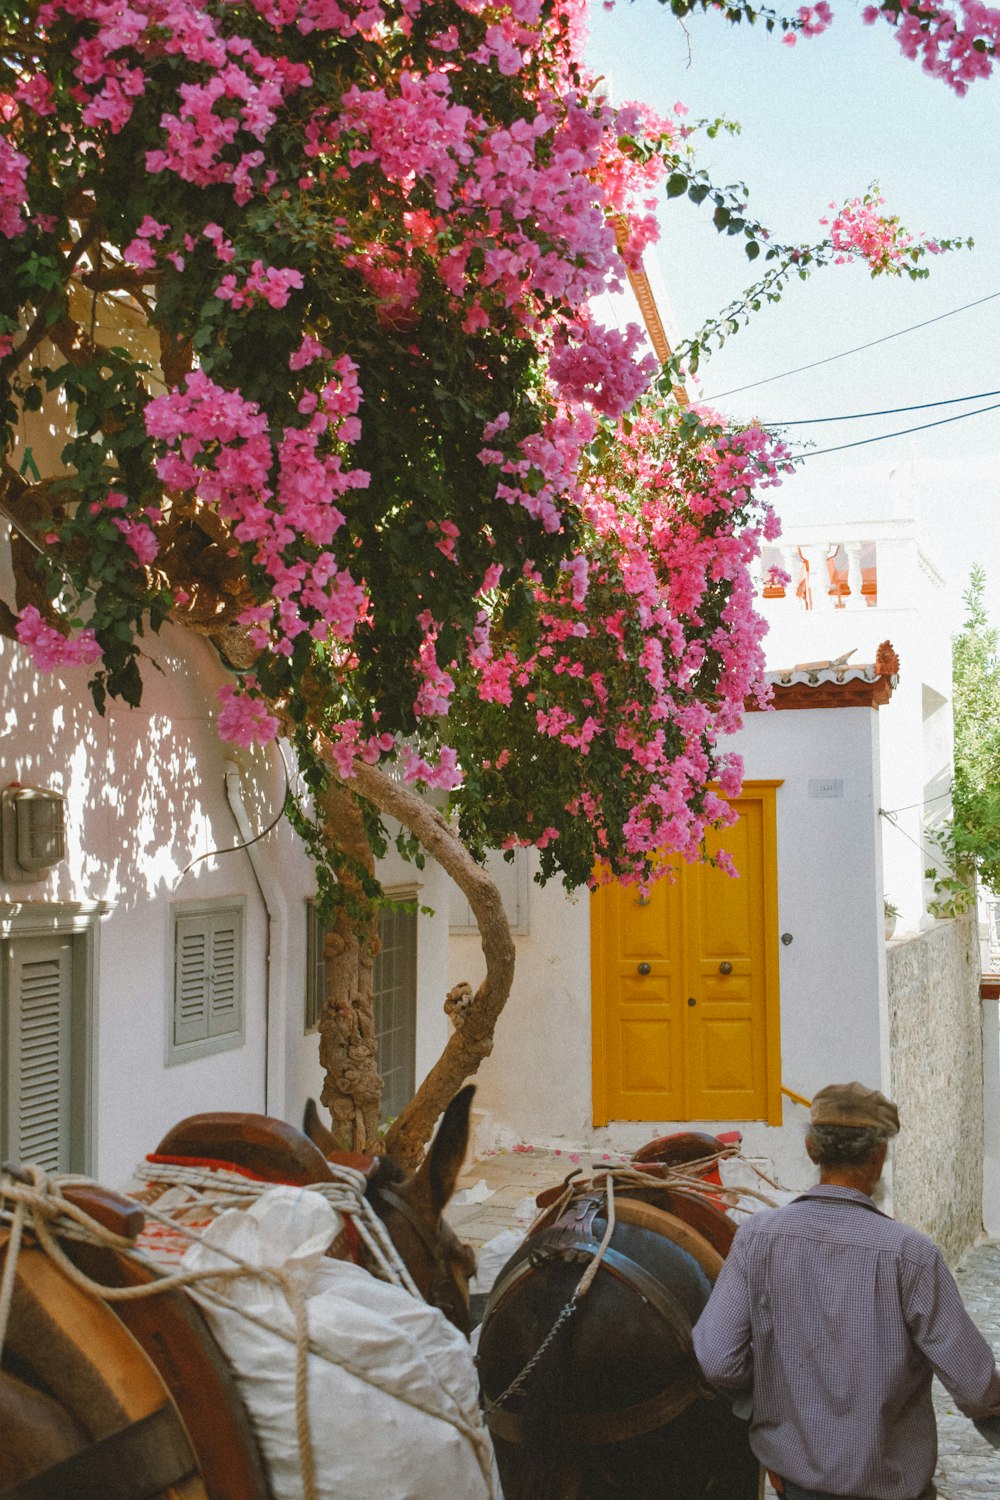 a person walking by a tree with pink flowers